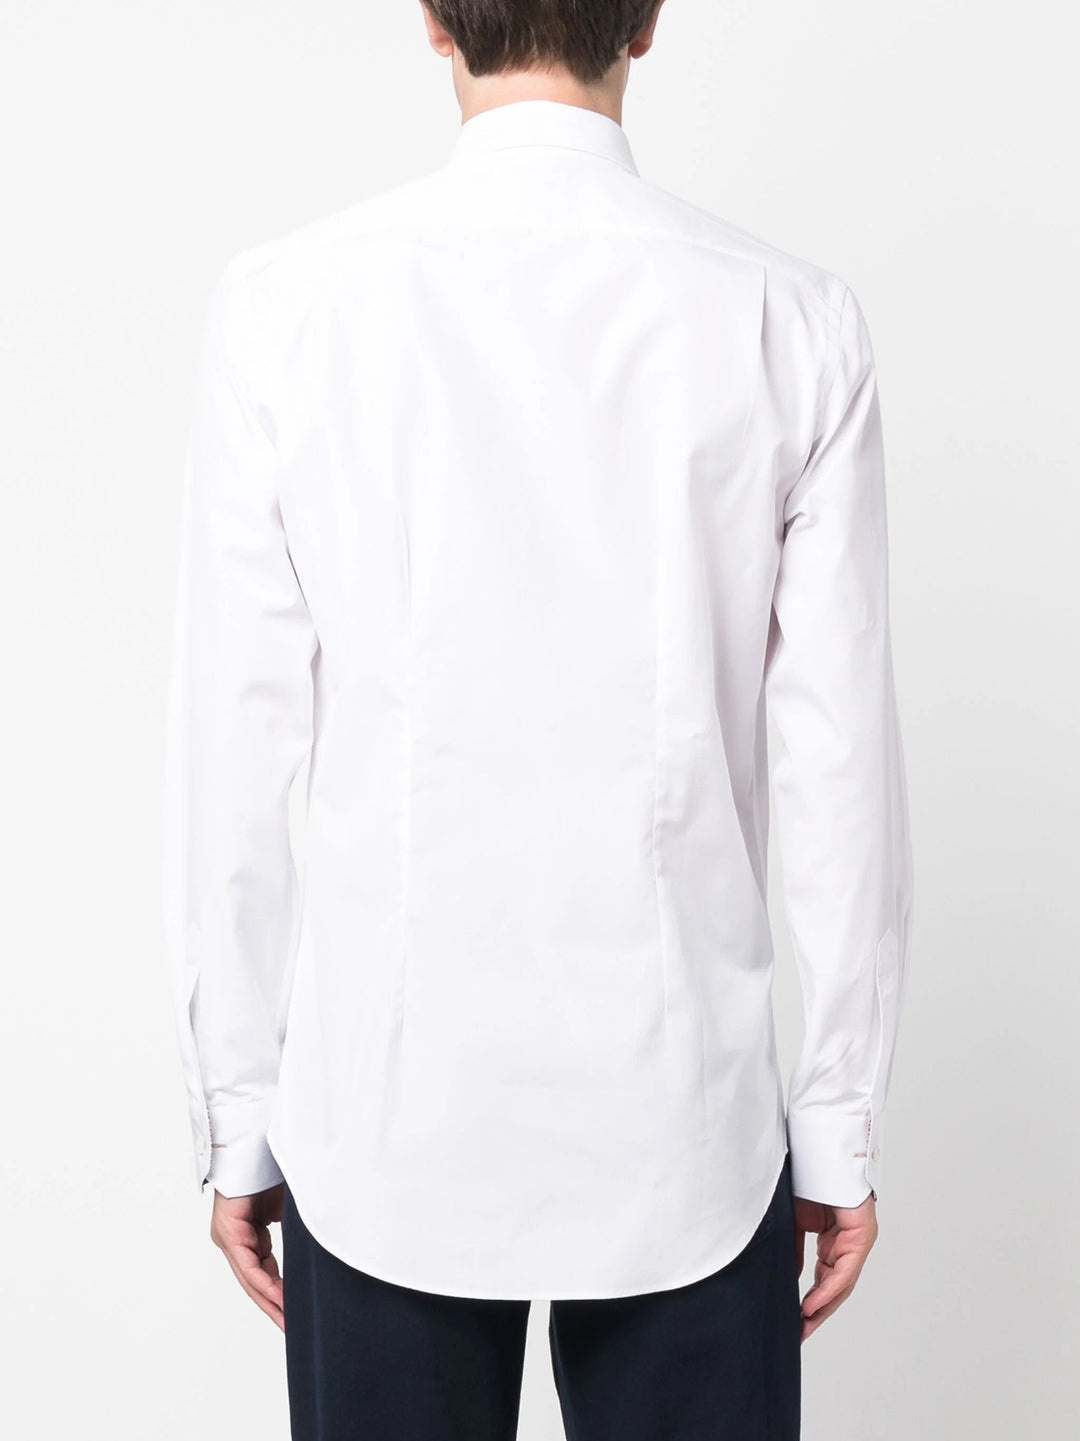 Mens Tailored Fit Shirt - 4